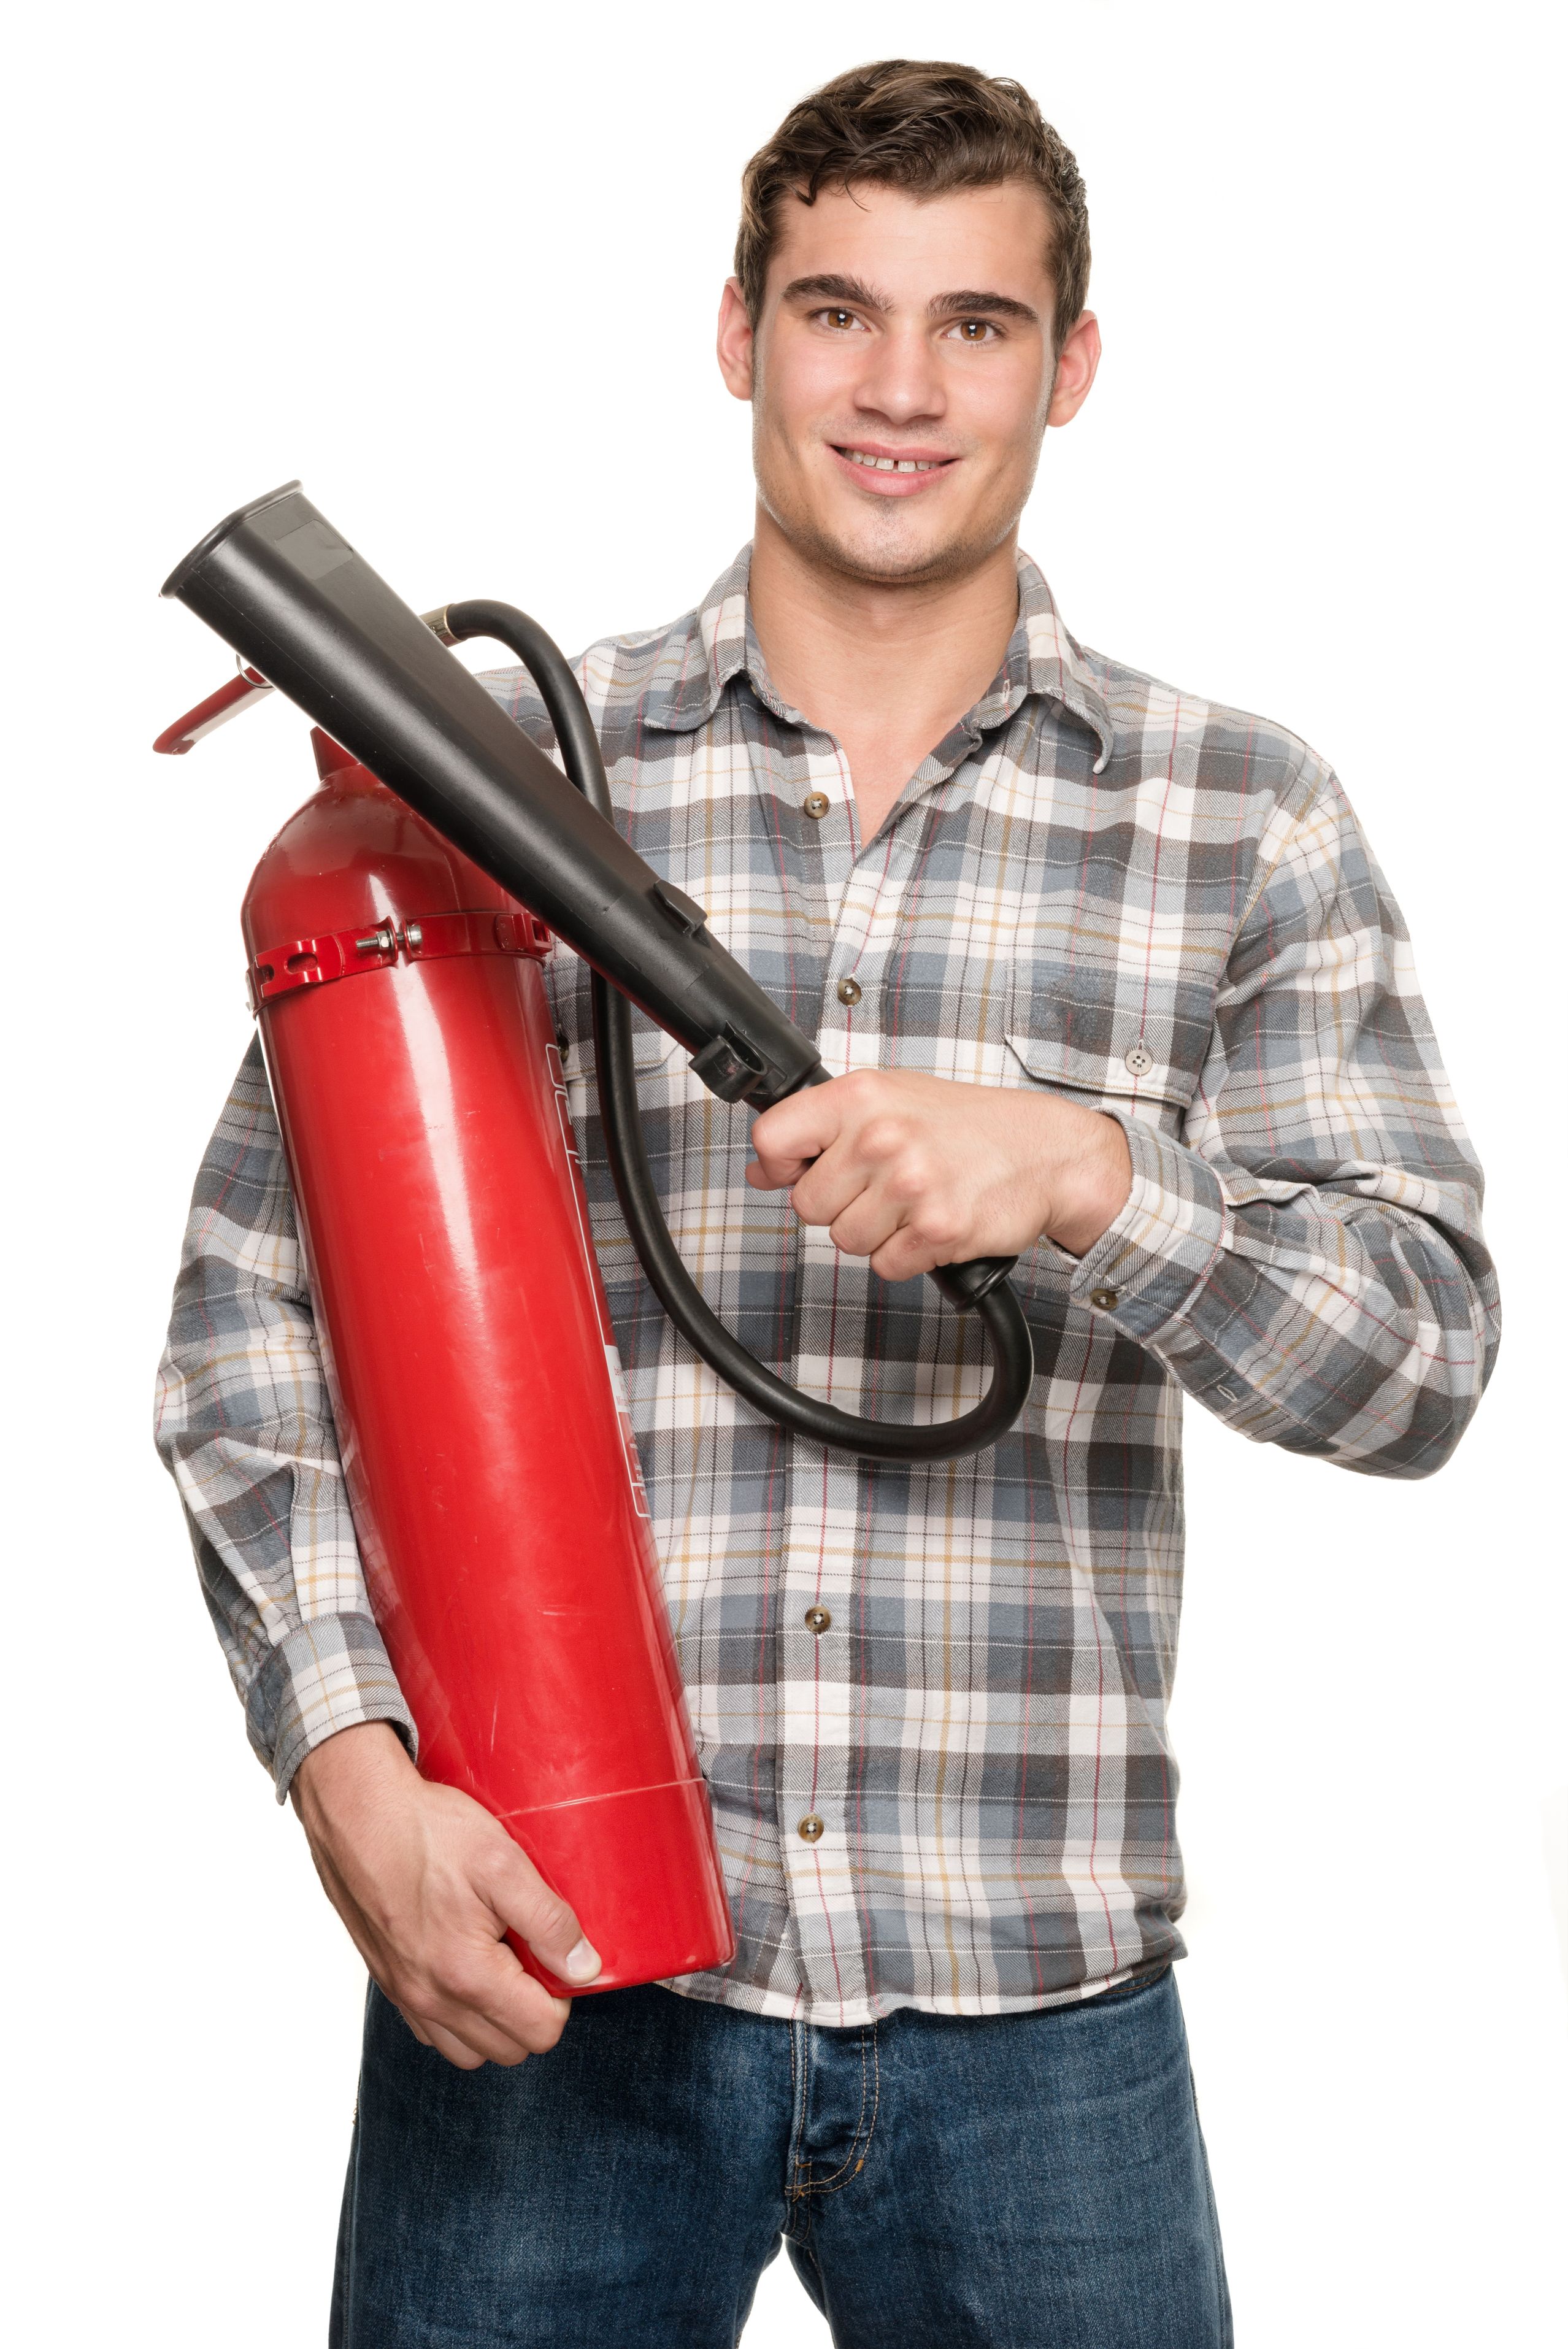 Tips For securing the Best Fire Inspection Companies in NJ